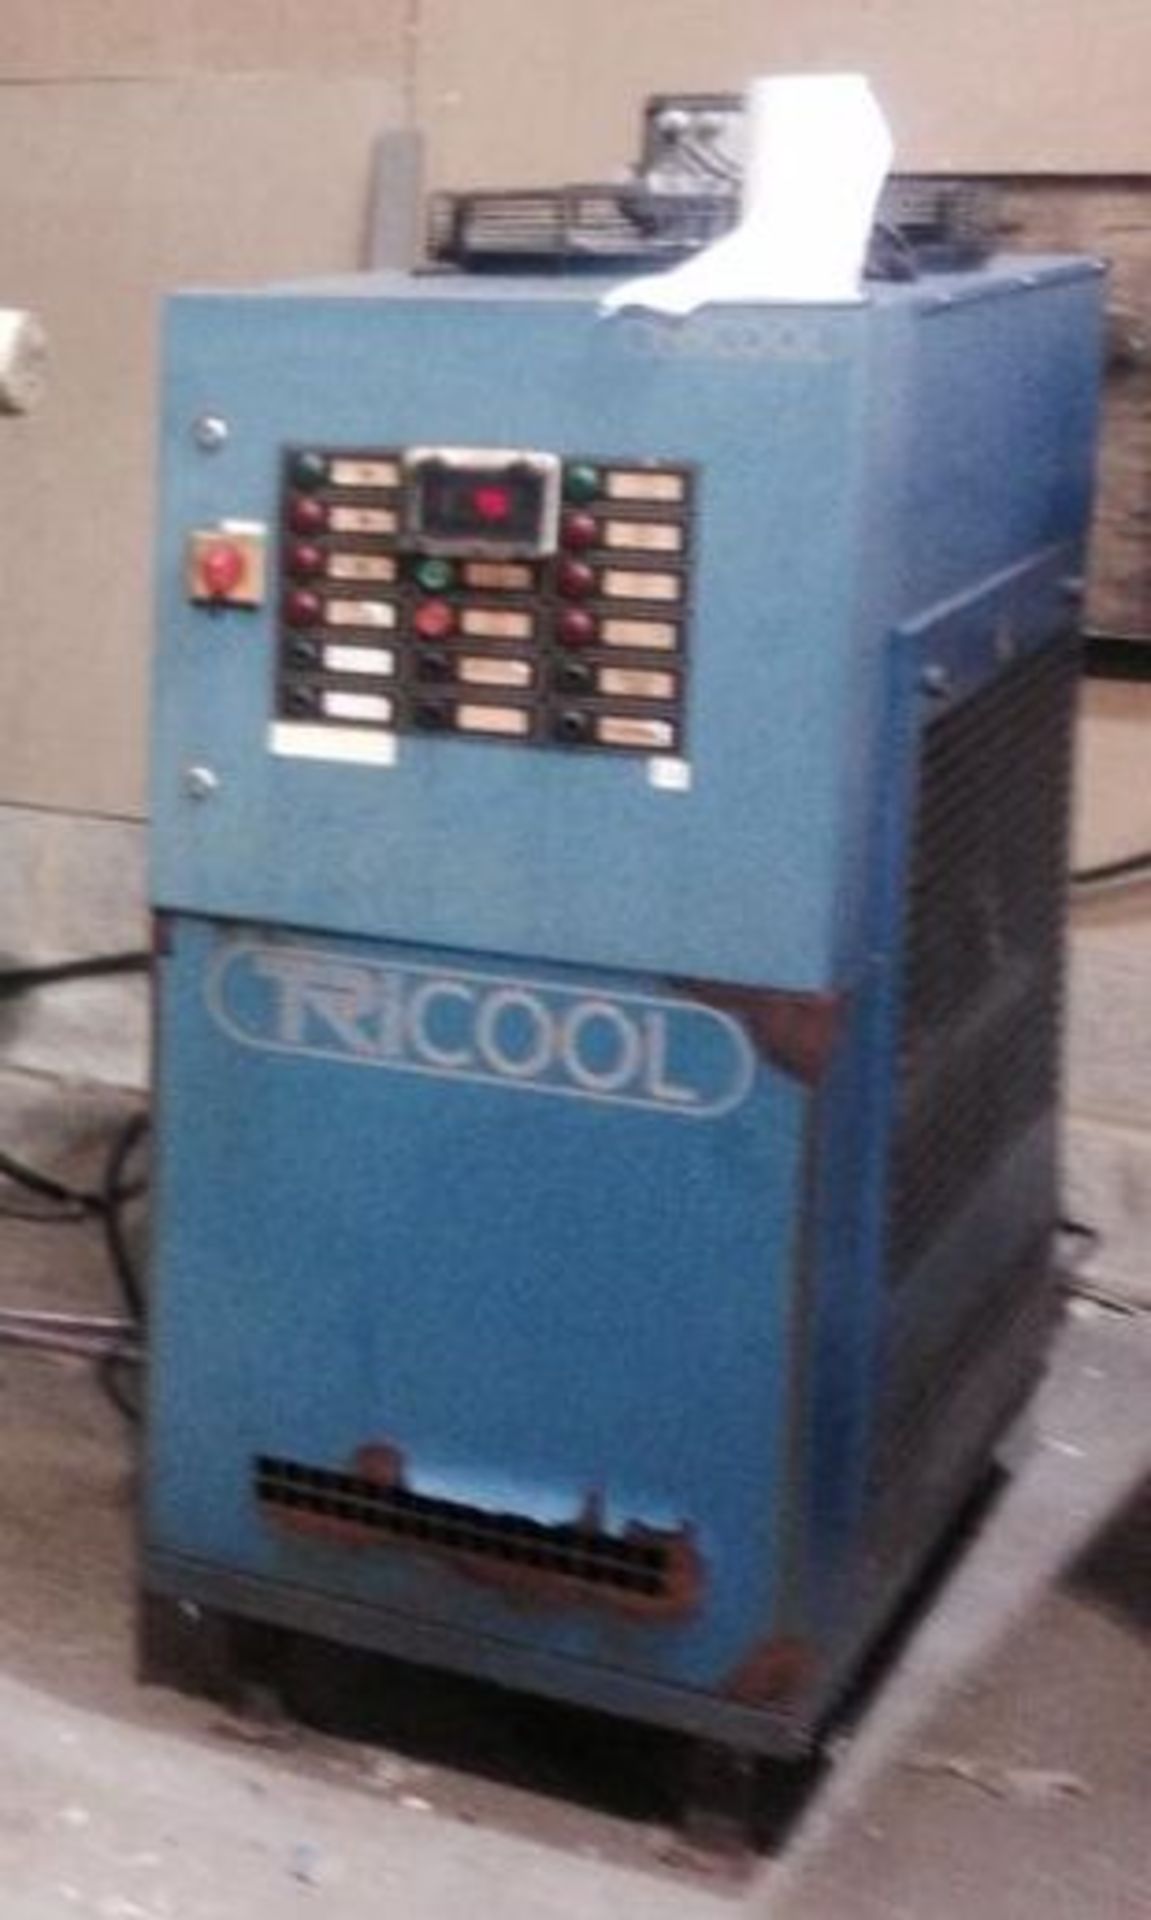 Tricool 21 S2/45EXT Water Chilling Unit, serial no. 45/S2/3561